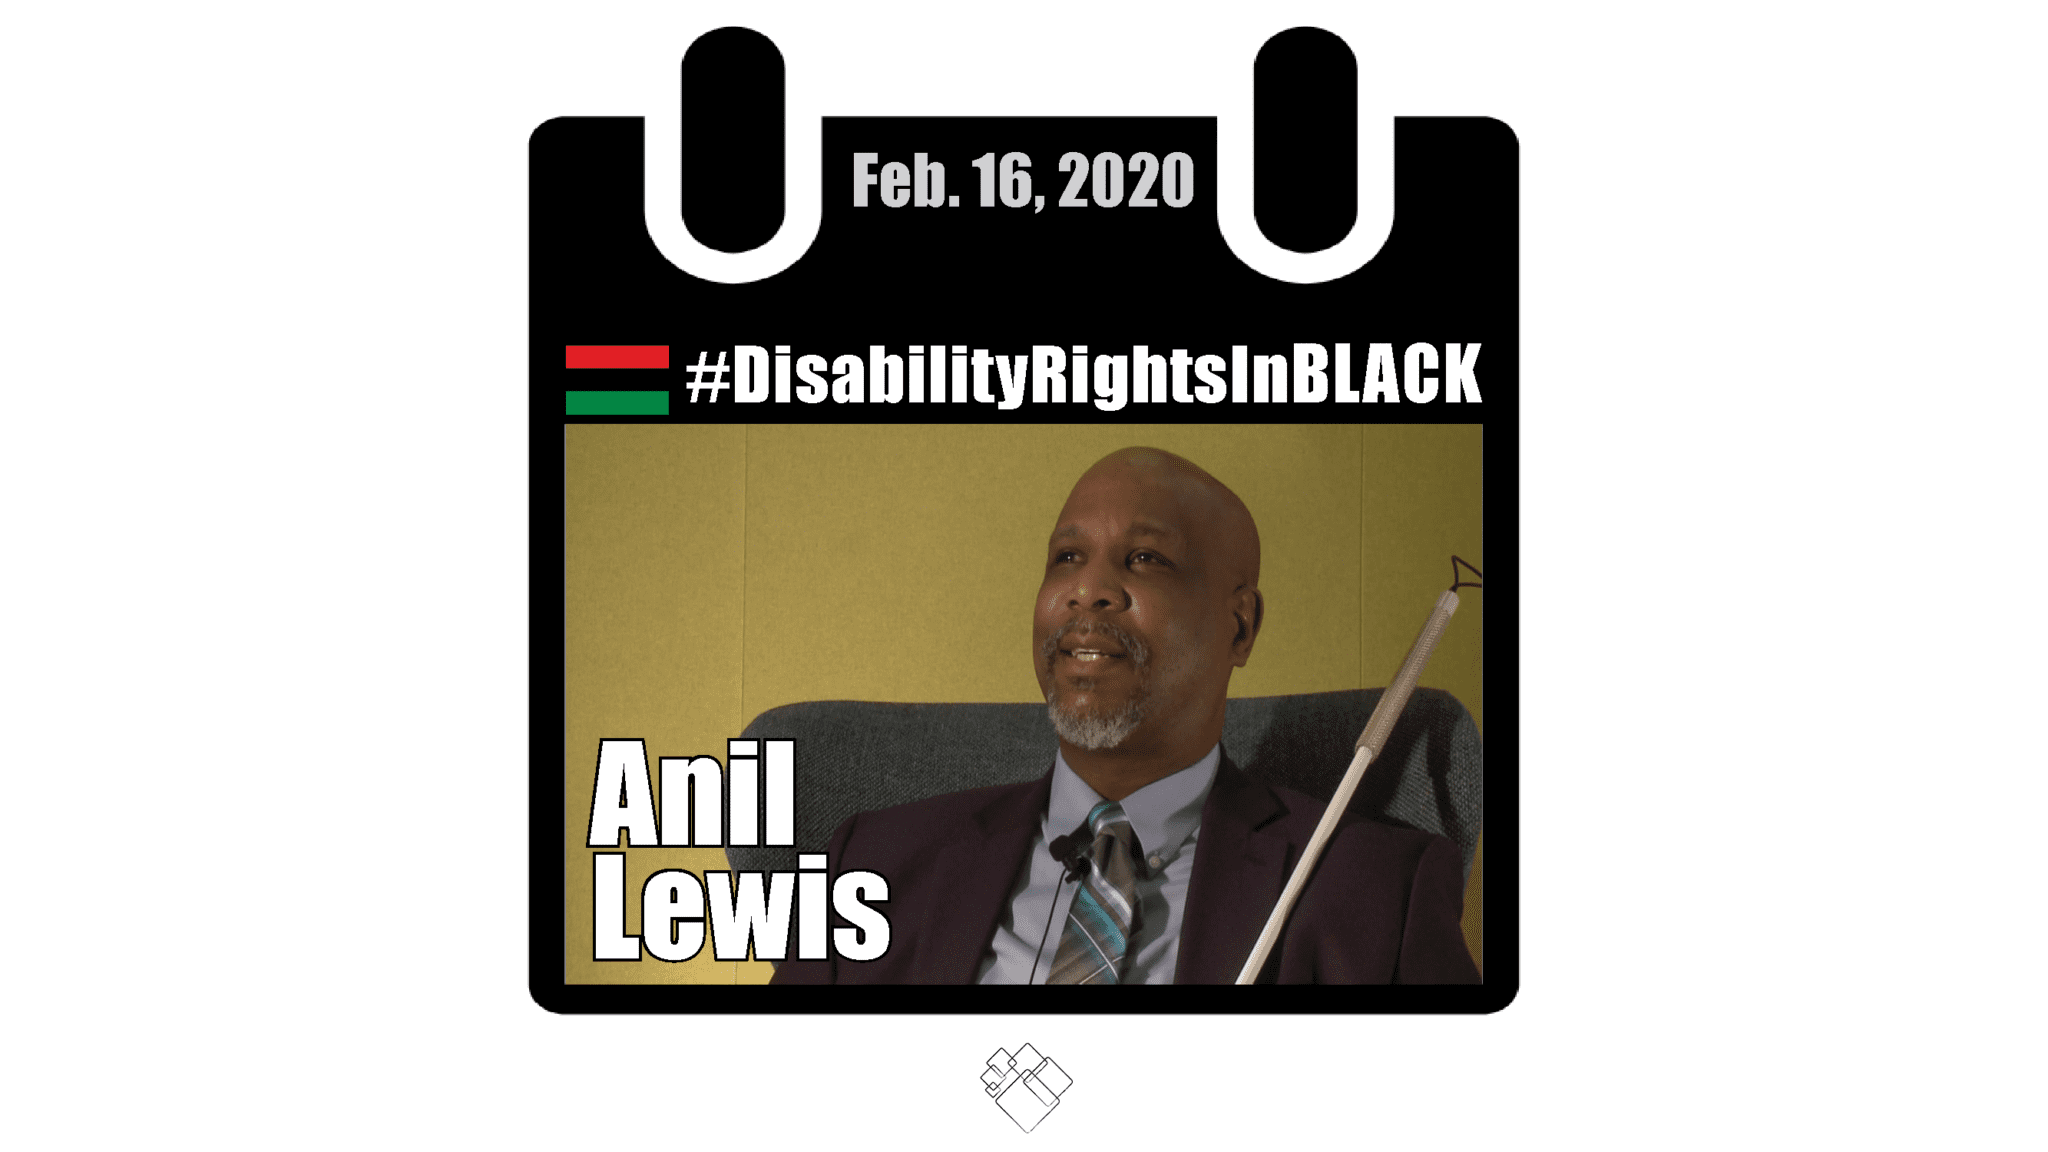 Anil sits in a chair for an interview, white cane in frame. The Disability Rights in Black calendar style frame with the hashtag for the series at the top and the date, February 16, 2020.